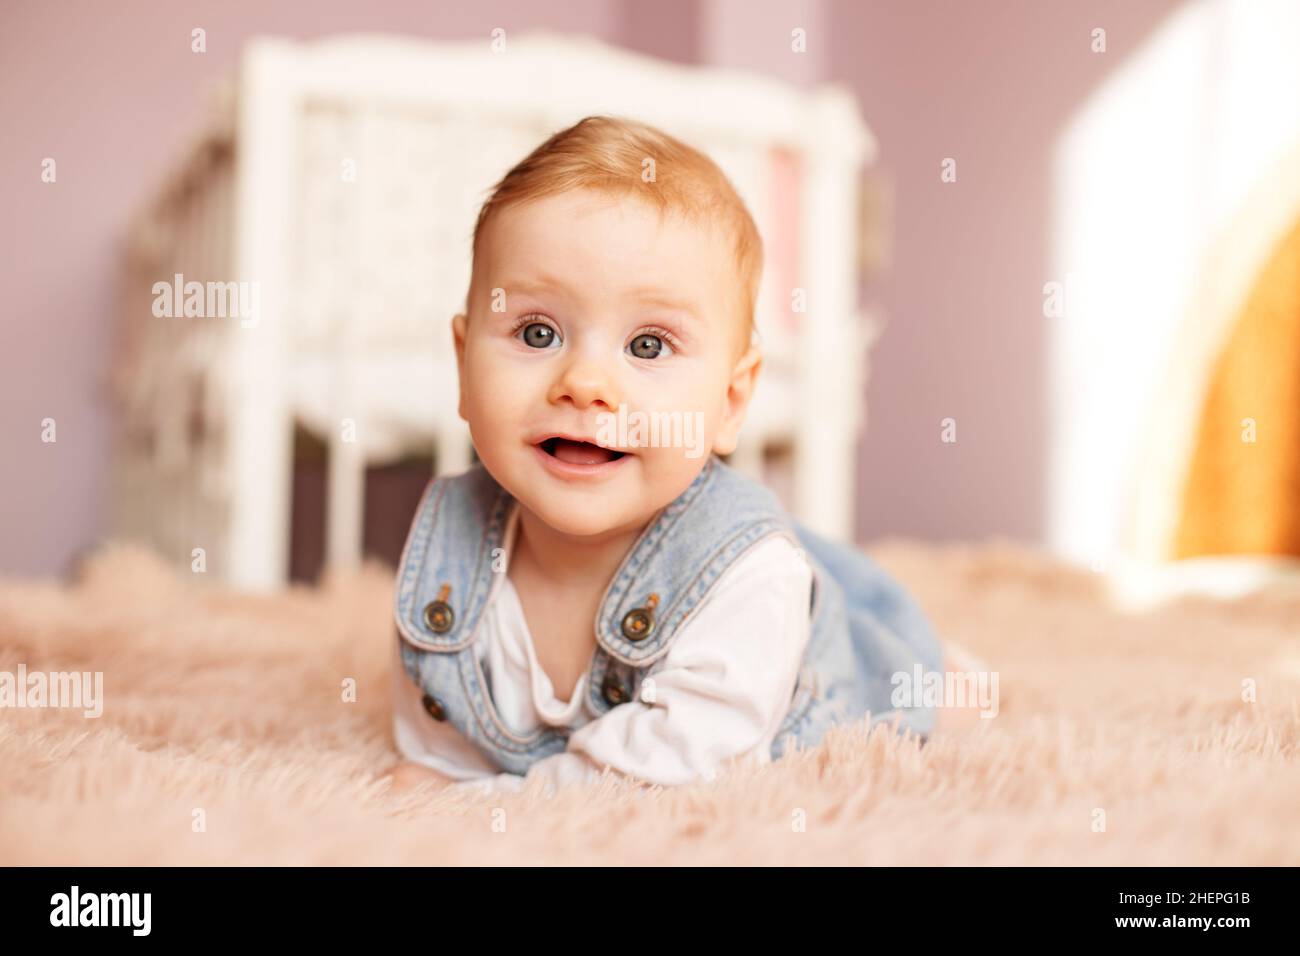 Newborn 5 months old lies on bed on stomach. Baby girl smiles and plays in room. Denim sundress. Soft bedspread. Stock Photo